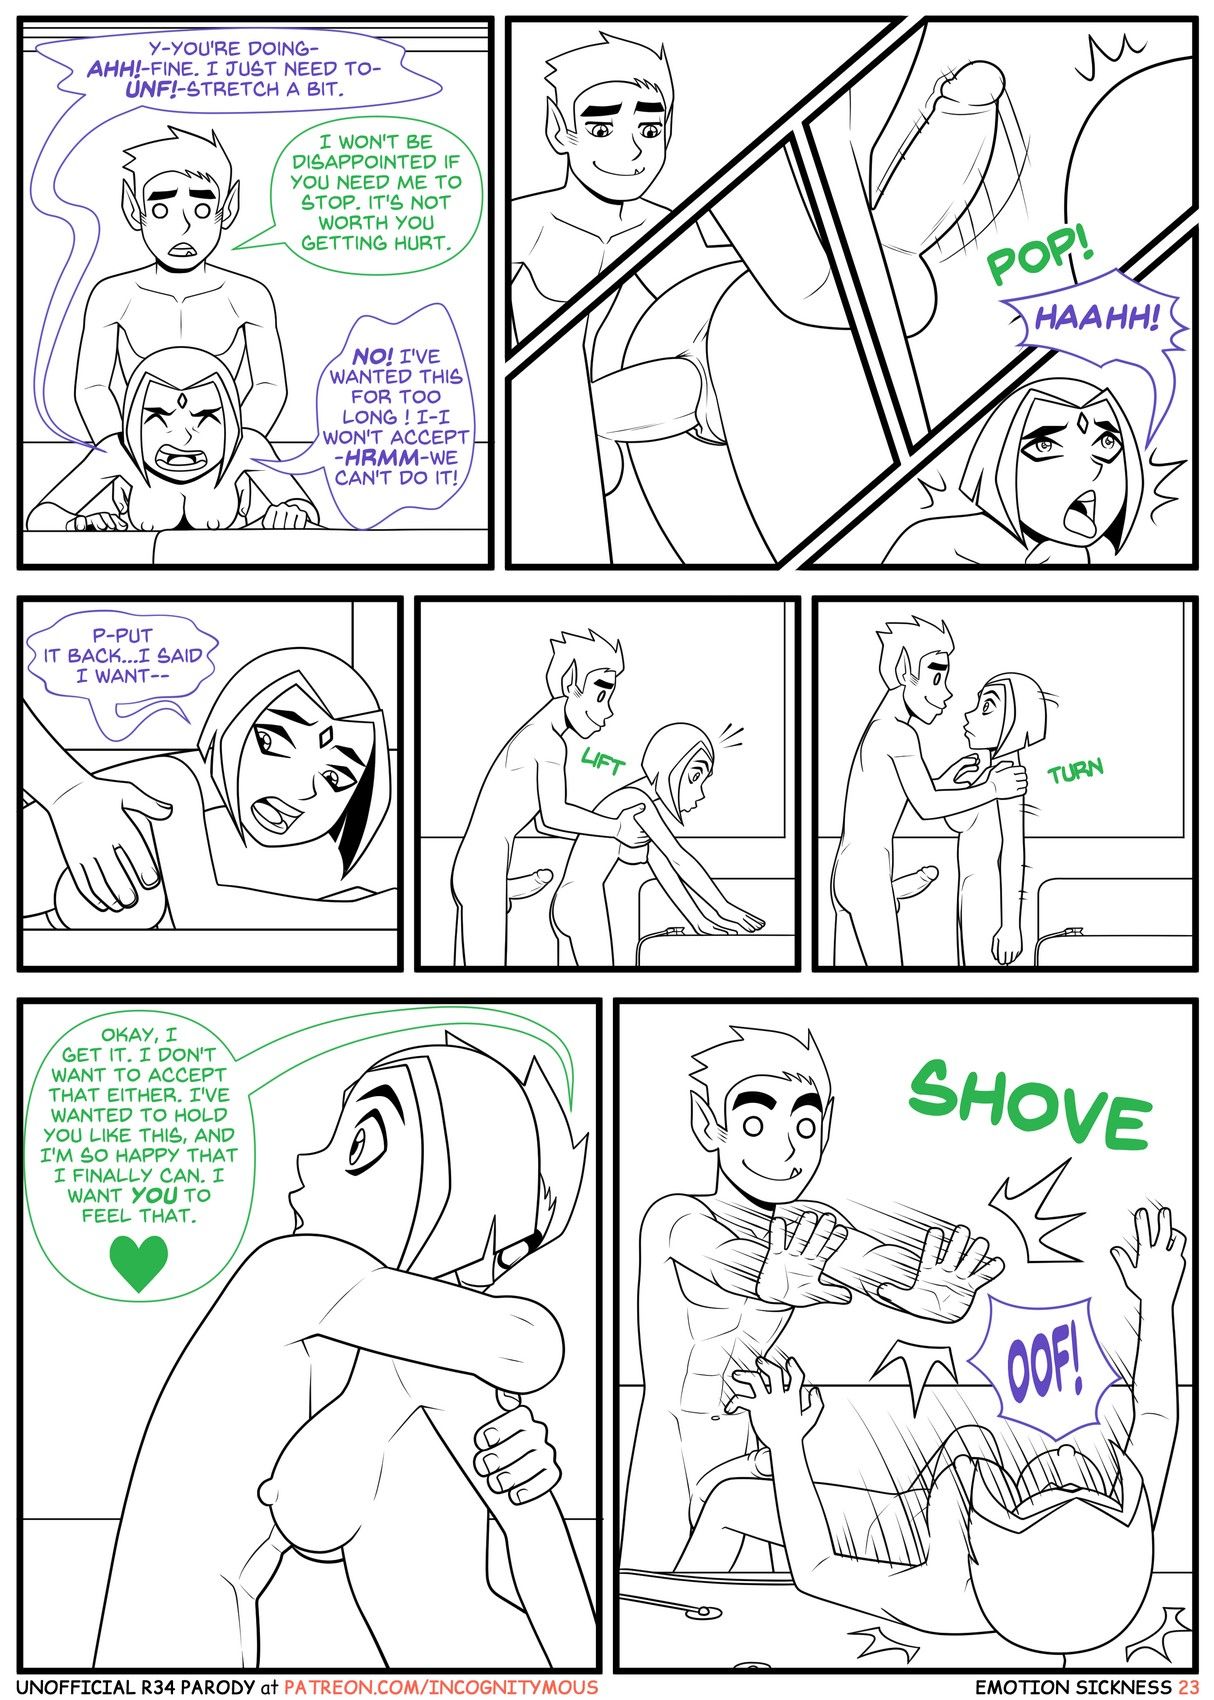 Teen Titans - Emotion Sickness (Incognitymous) page 46